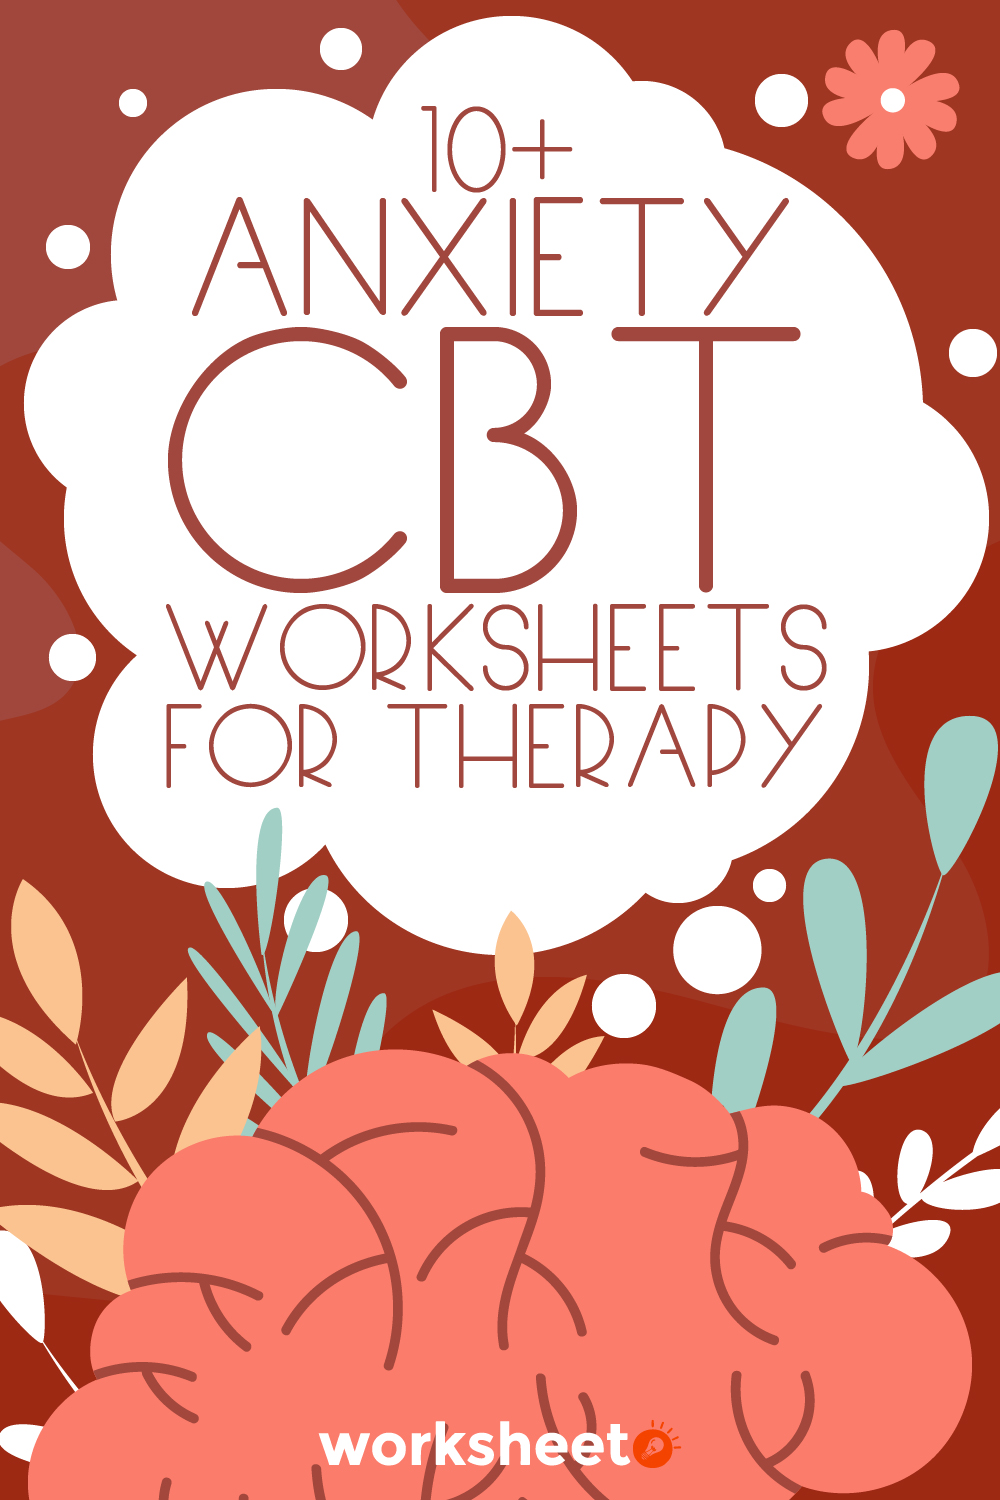 Anxiety CBT Worksheets for Therapy